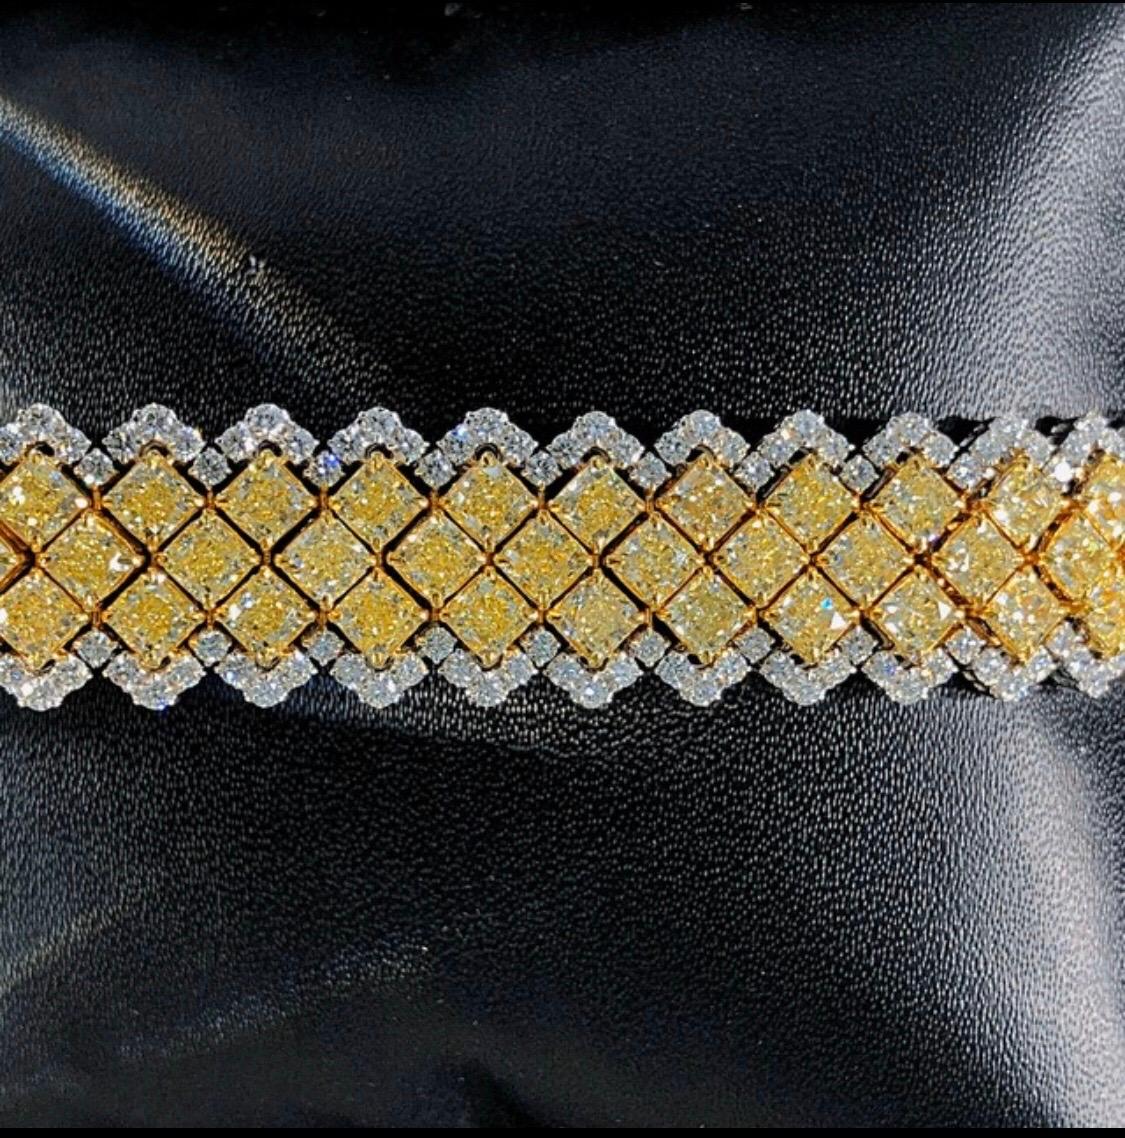 Showcasing an astonishing 24 carats total weight this bracelet is jaw dropping! 99 radiant cut yellow diamonds totaling 20.25ct and 264 round white diamonds totaling 3.92ct. All lengths available this one is 7